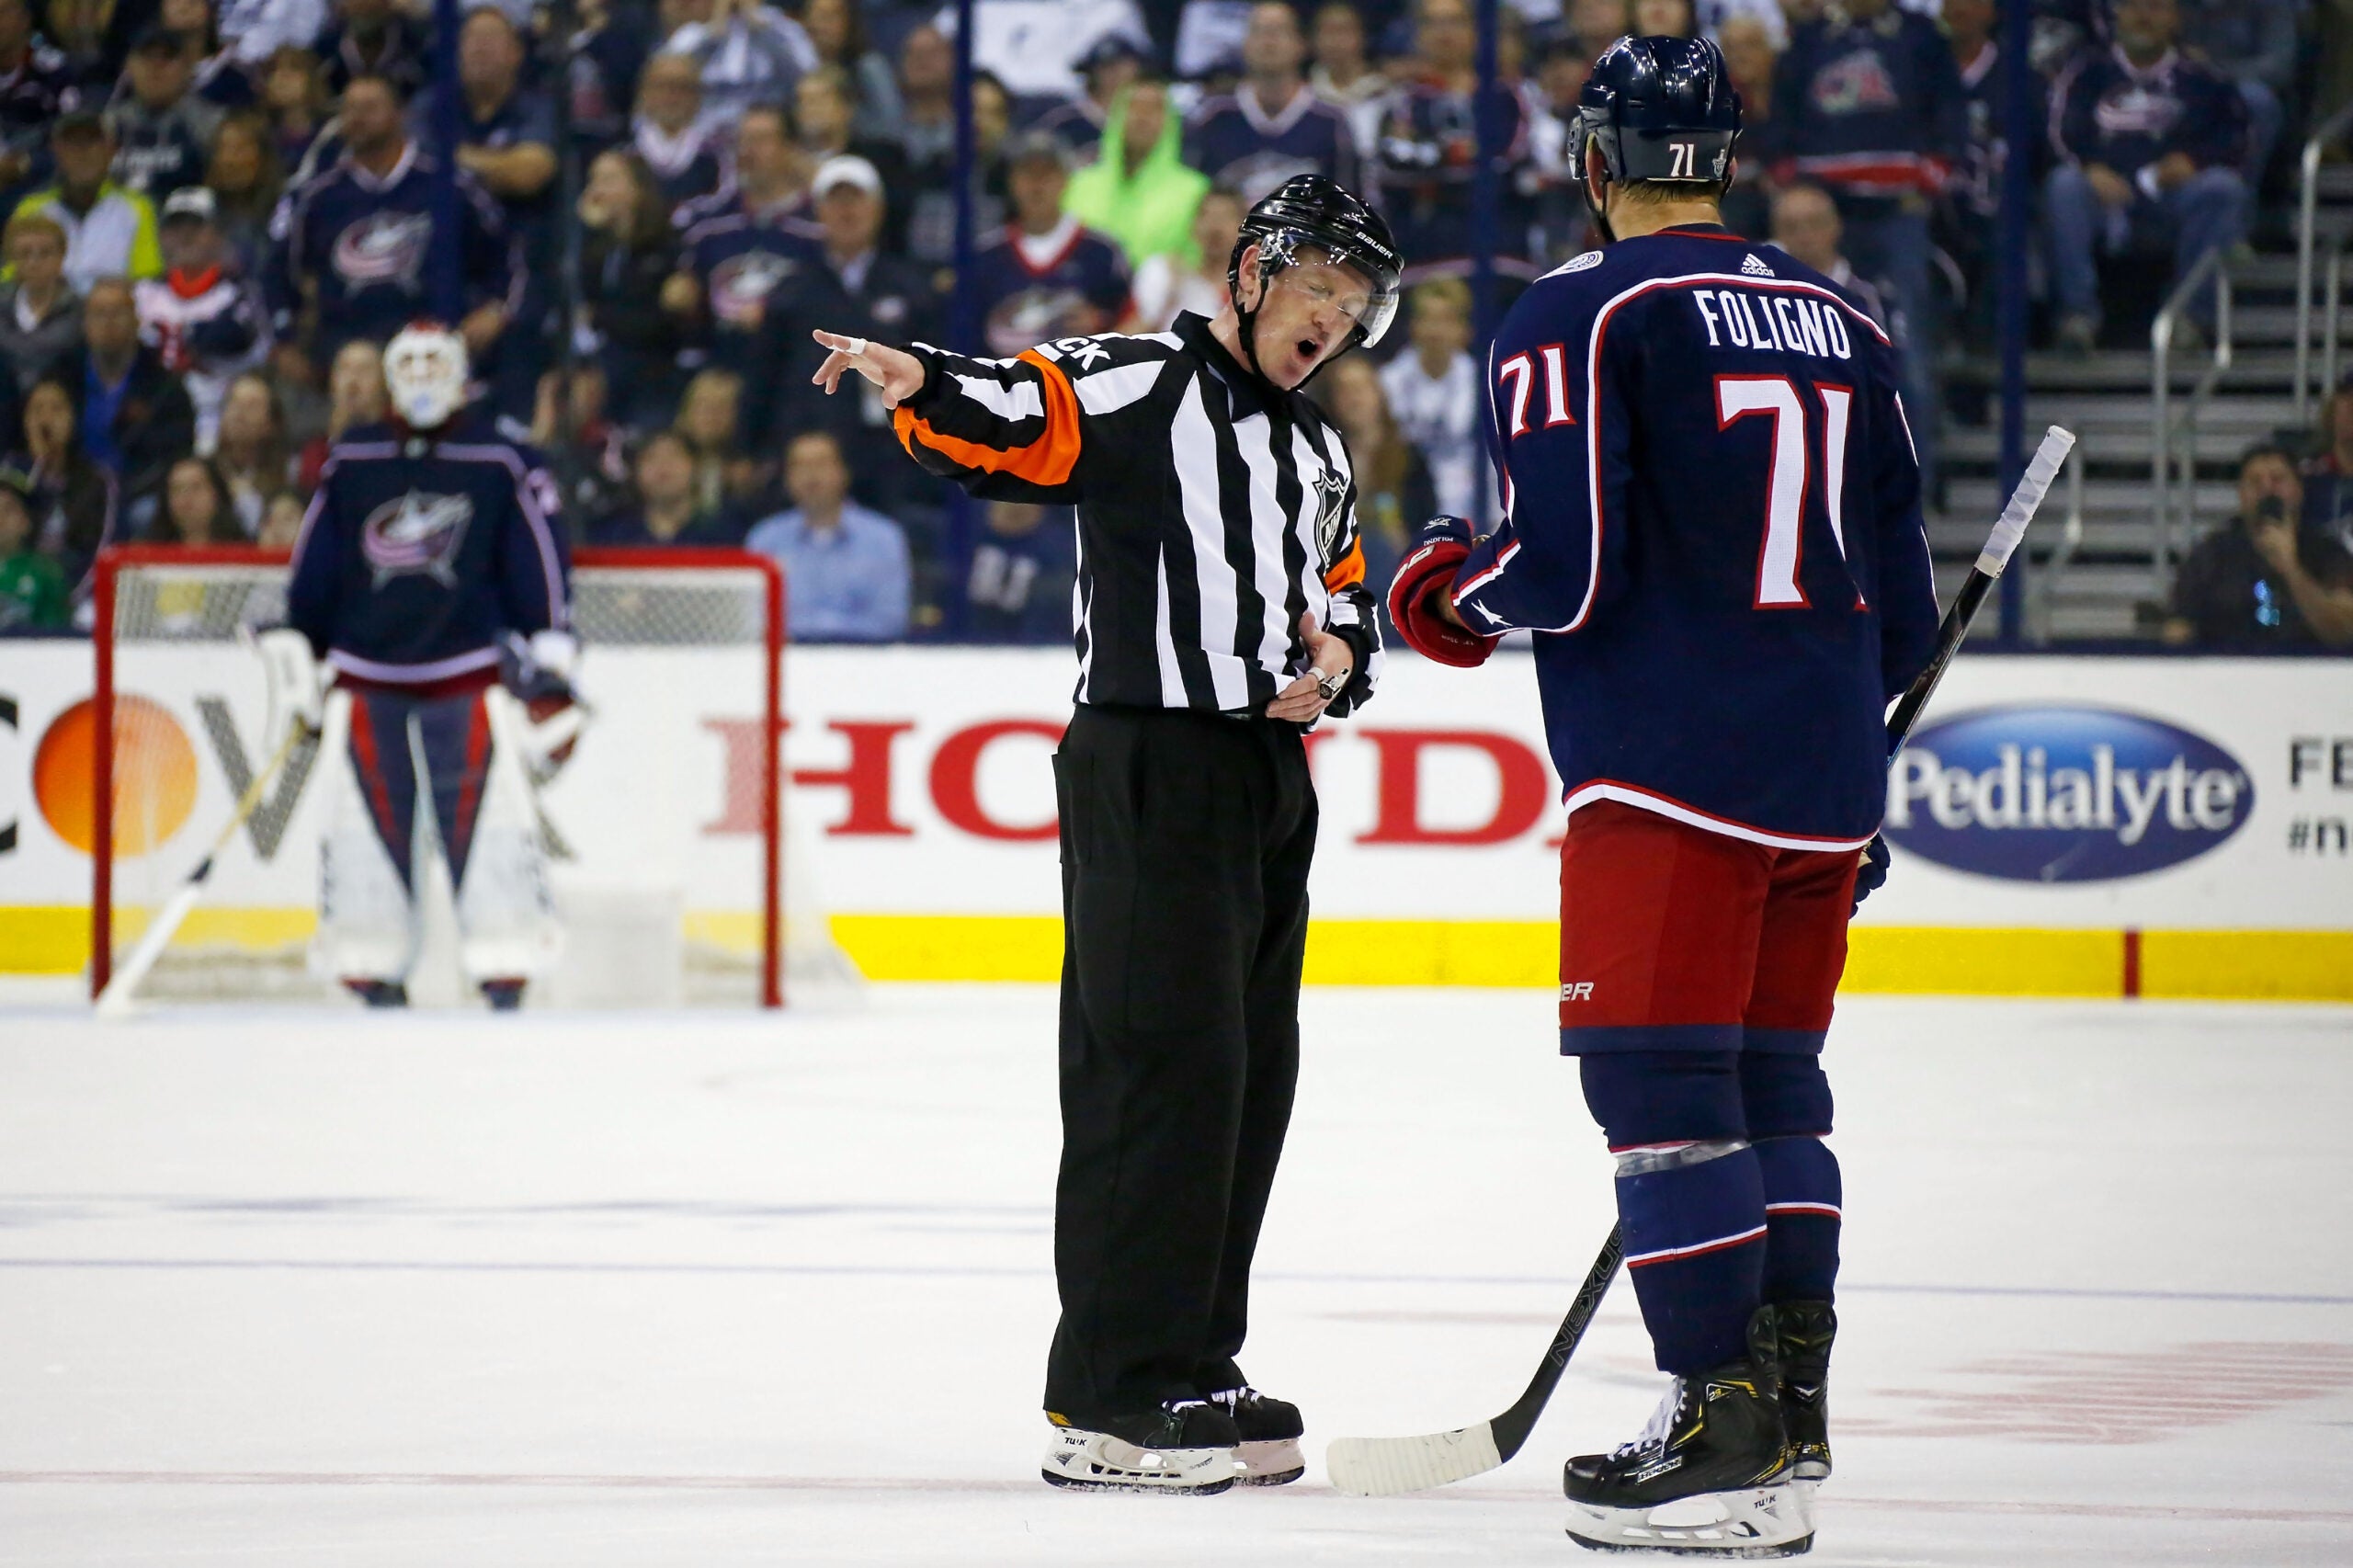 Referee banned from working NHL games after being caught on live